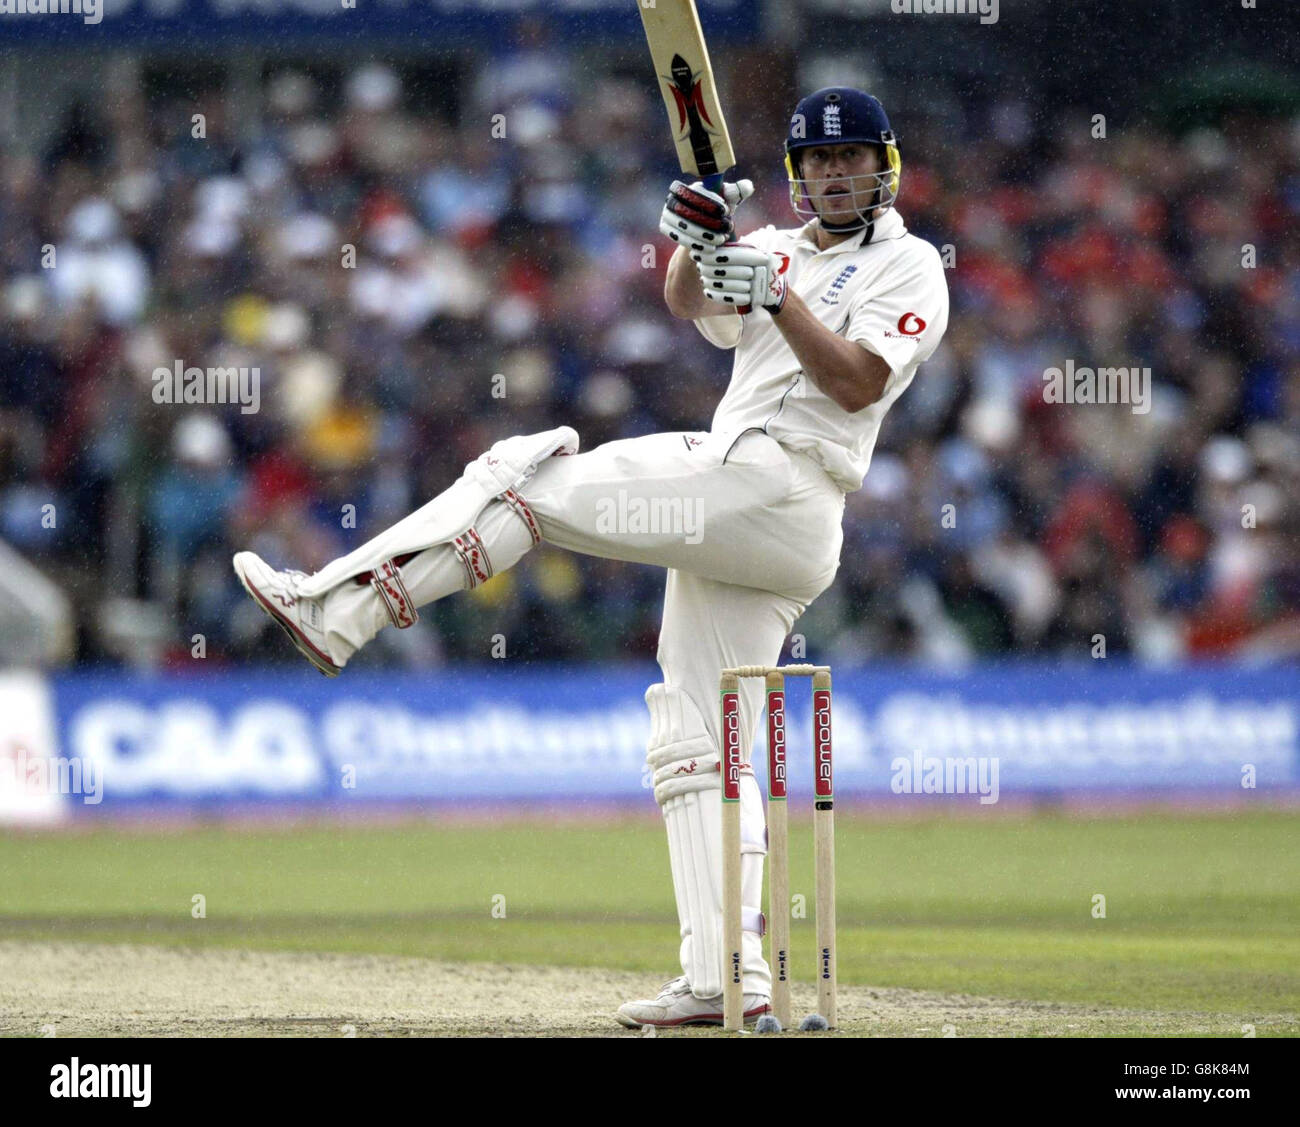 Cricket - The Ashes - Npower terzo Test - Inghilterra / Australia - Old Trafford. Andrew Flintoff, inglese. Foto Stock